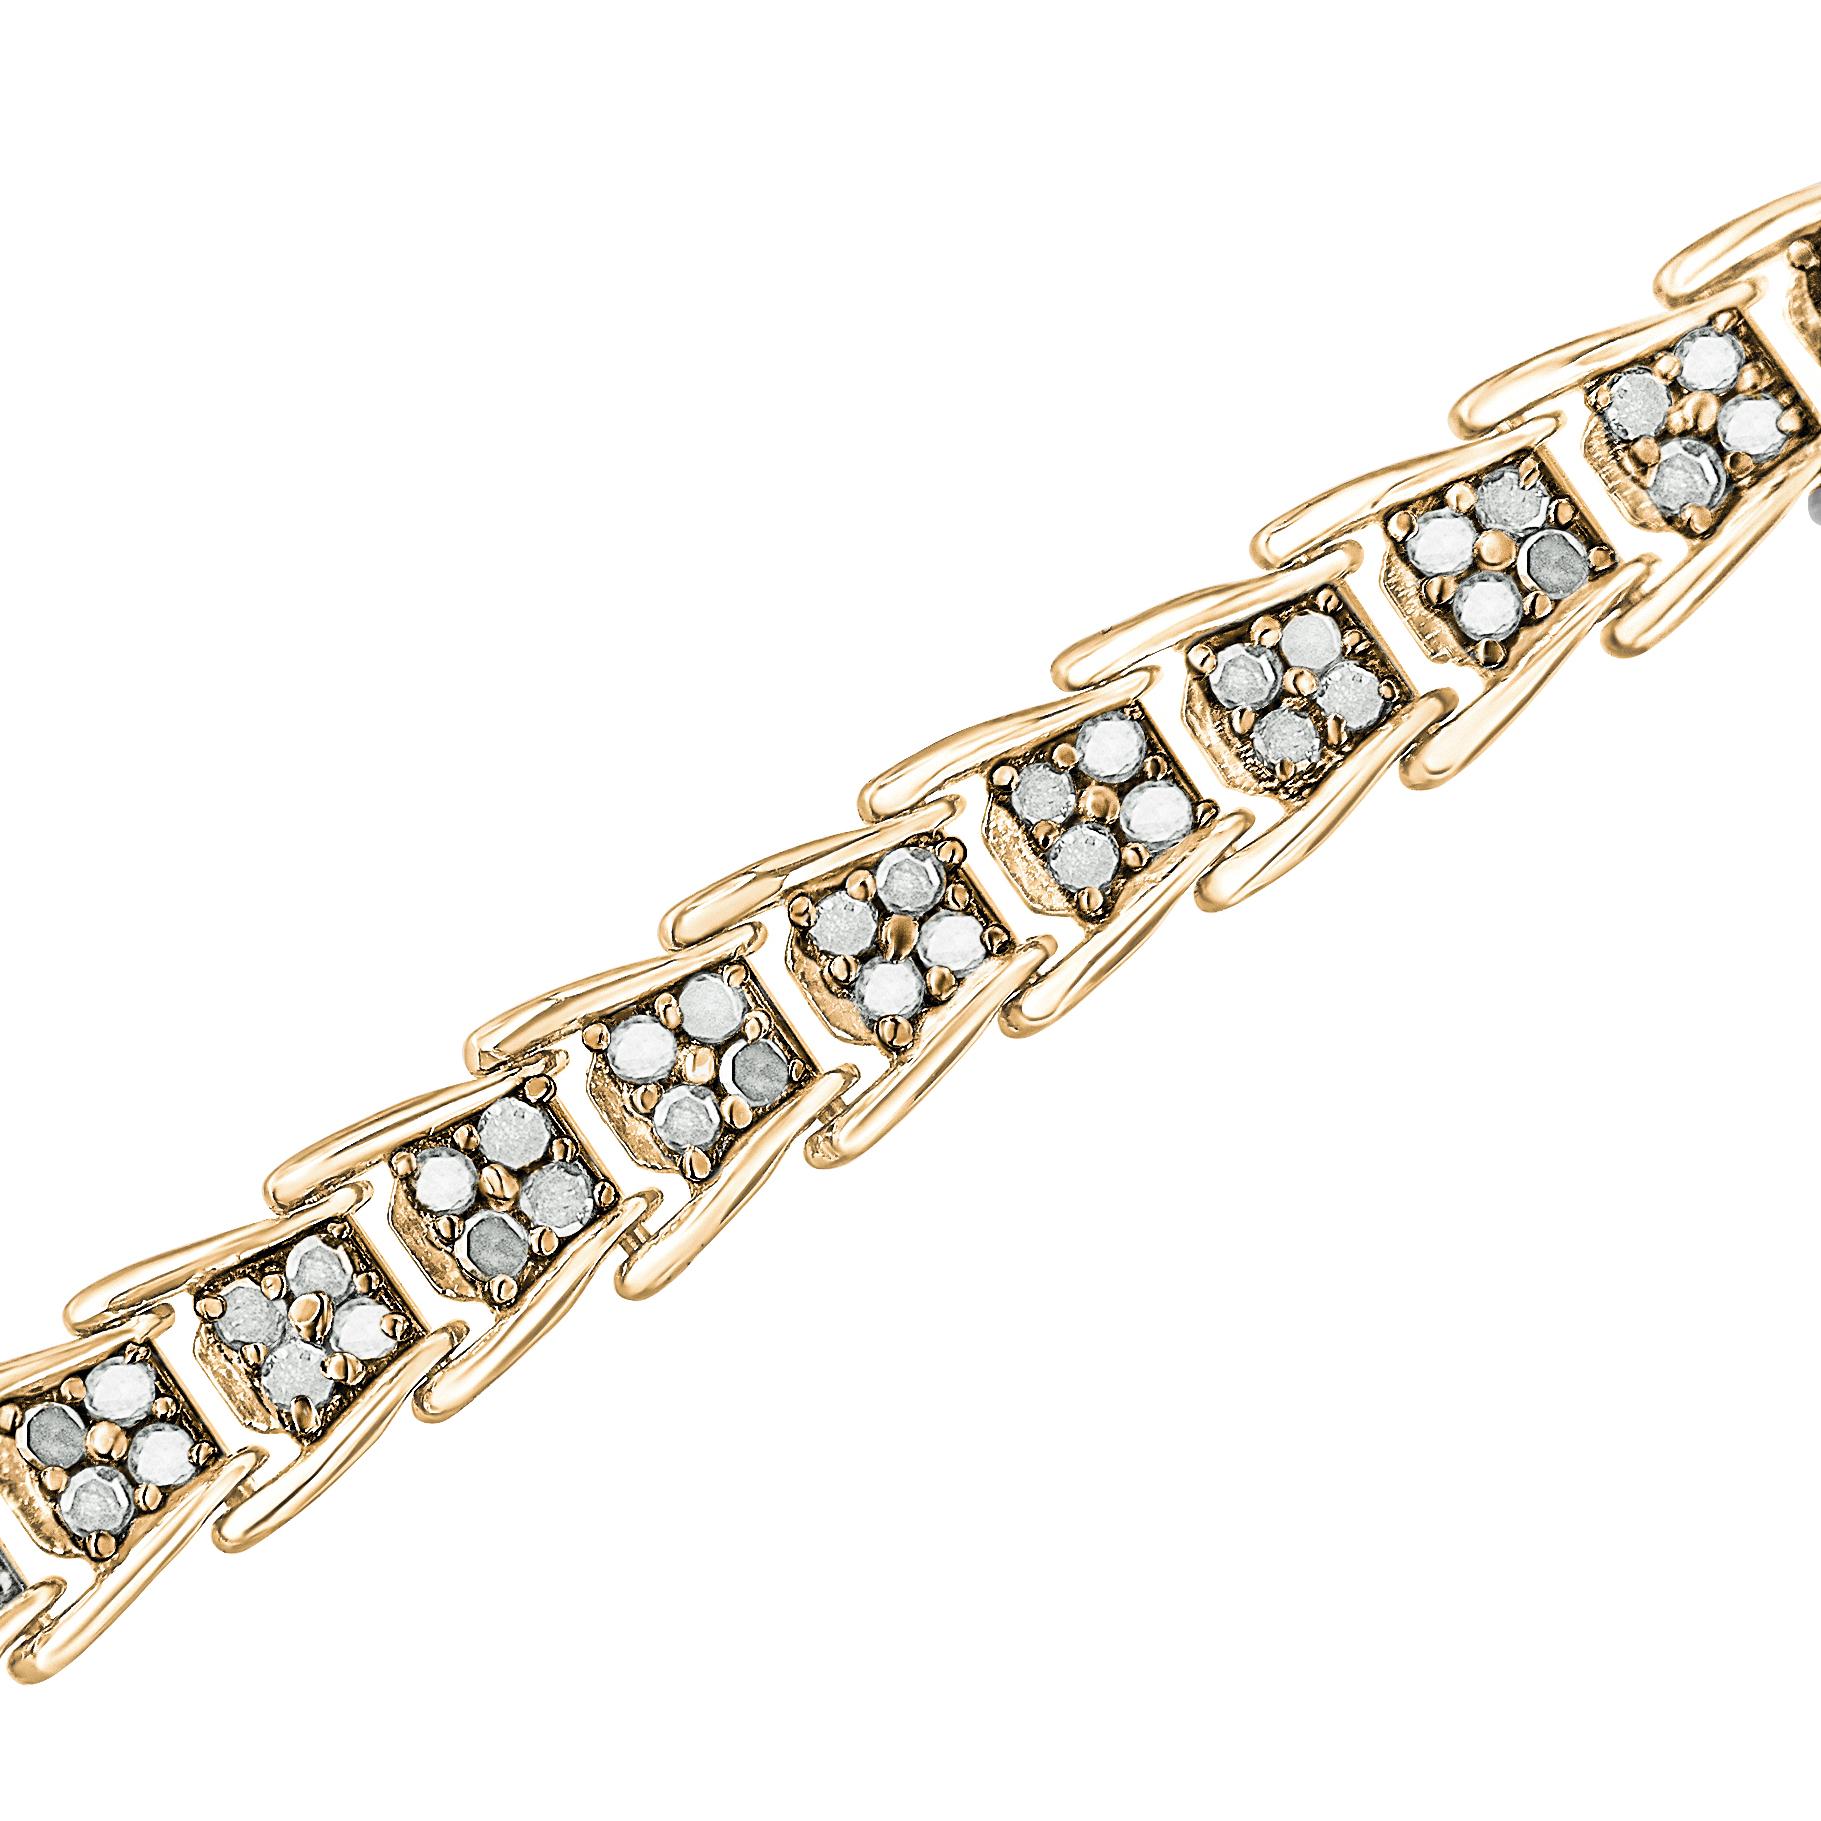 What makes this yellow-plated sterling silver bracelet so unique is the way each intricately detailed link fans out for a dramatic effect. And the 156 eye-catching rose-cut diamonds held inside add even more charm and character. Makes for a